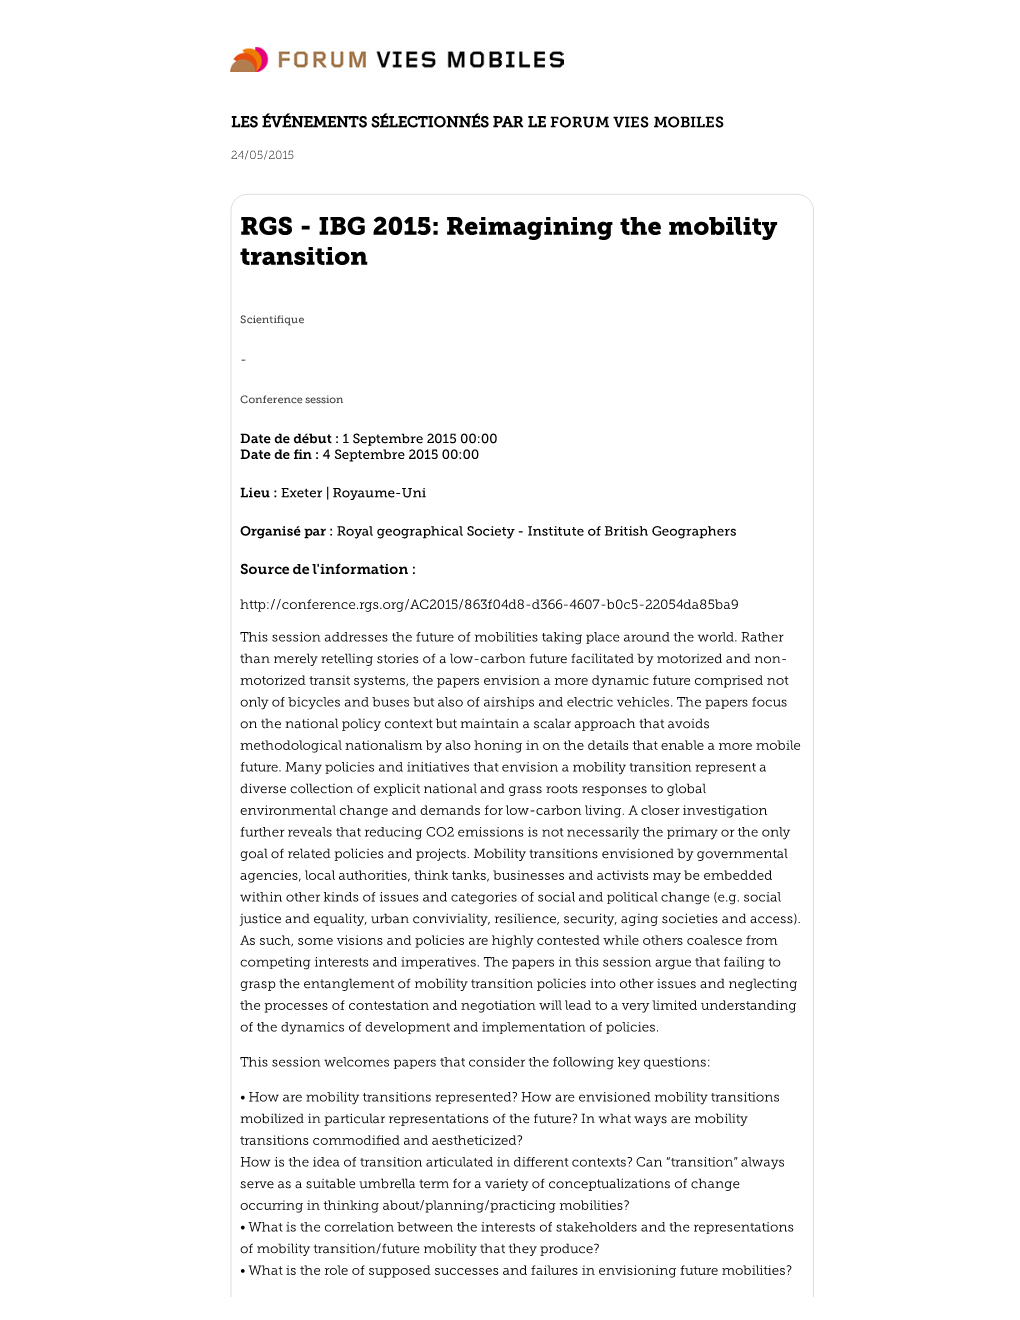 RGS - IBG 2015: Reimagining the Mobility Transition